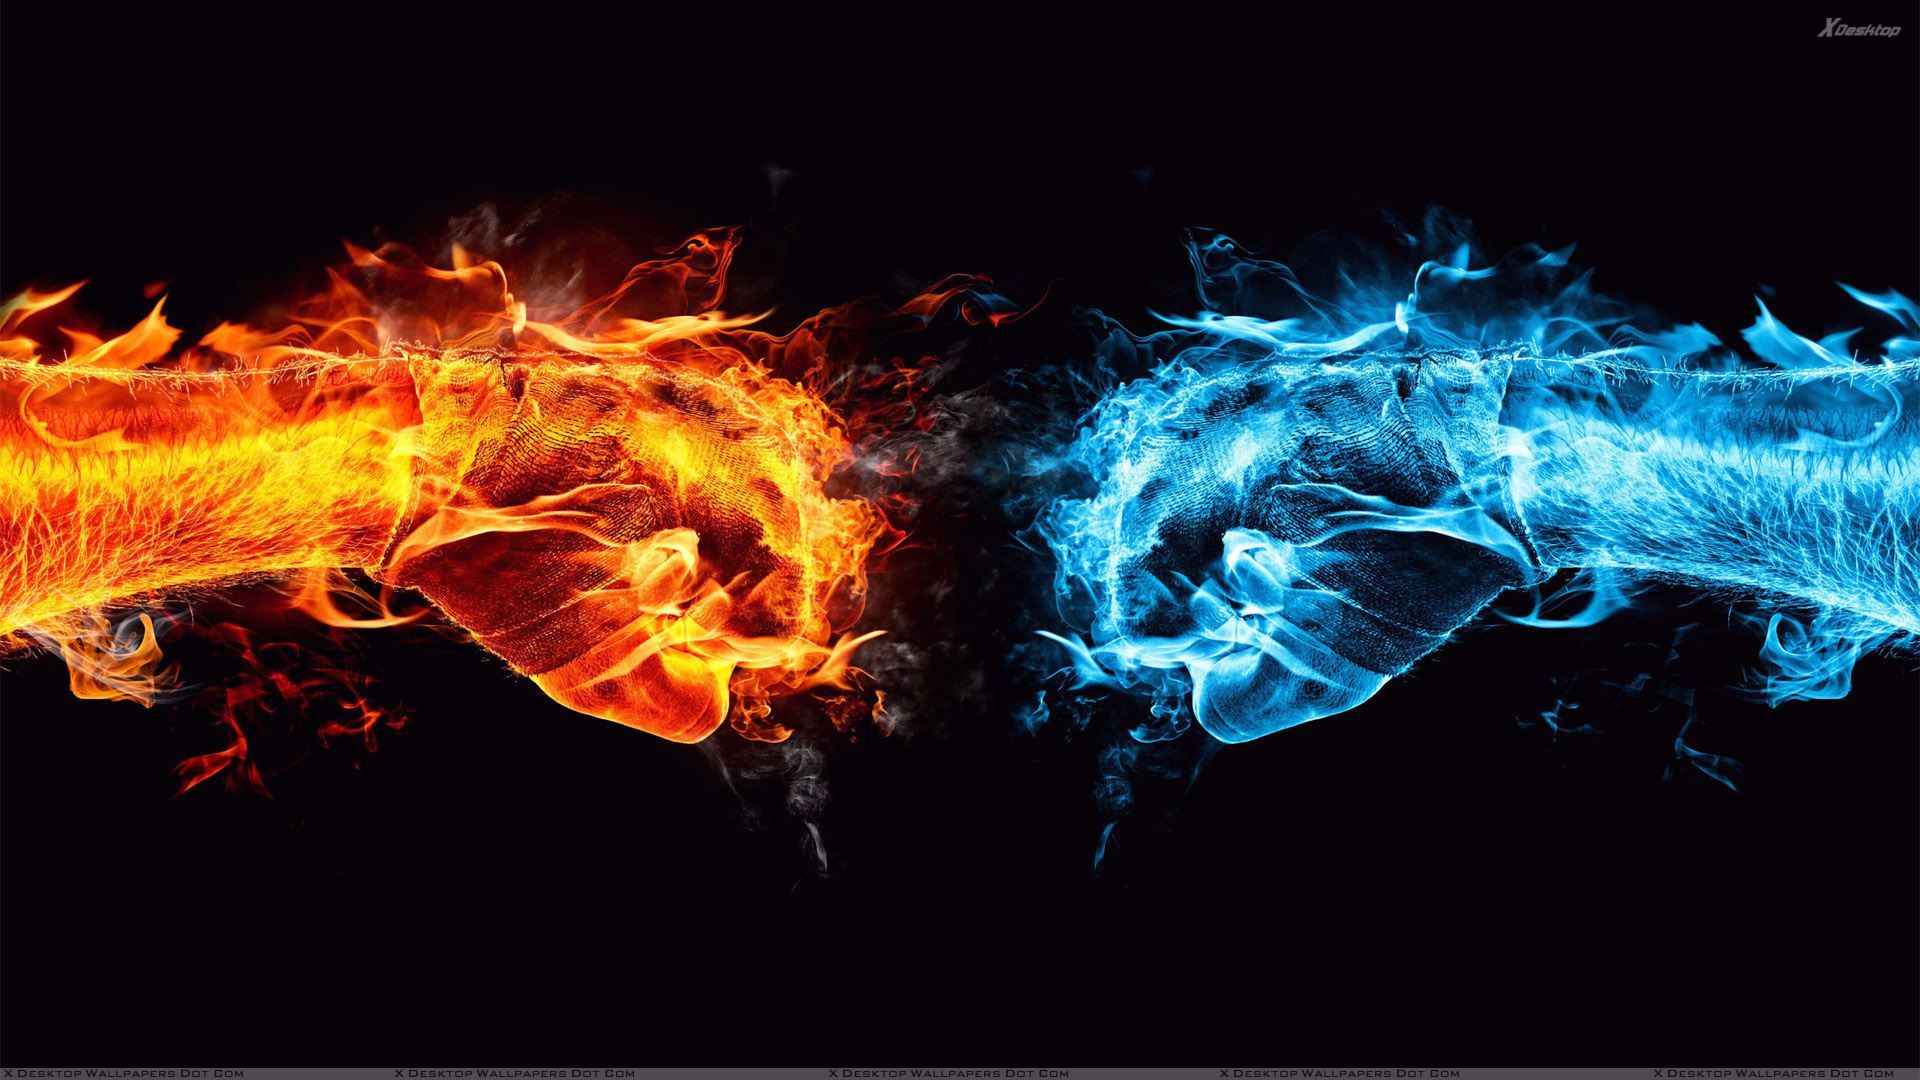 A Song Of Ice And Fire Wallpaper